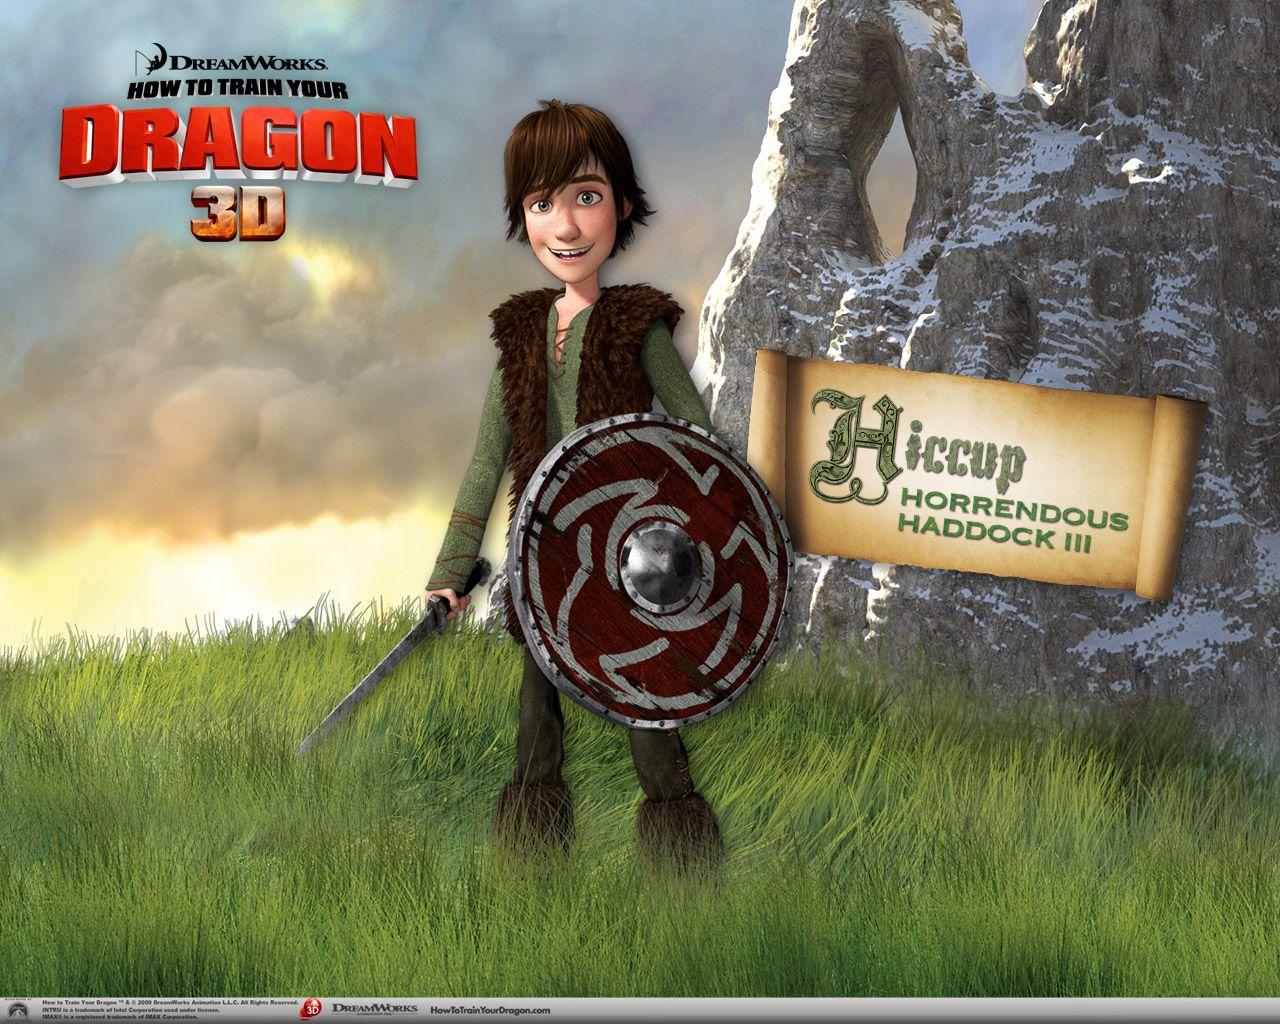 How To Train Your Dragon Wallpaper and Background Imagex1024